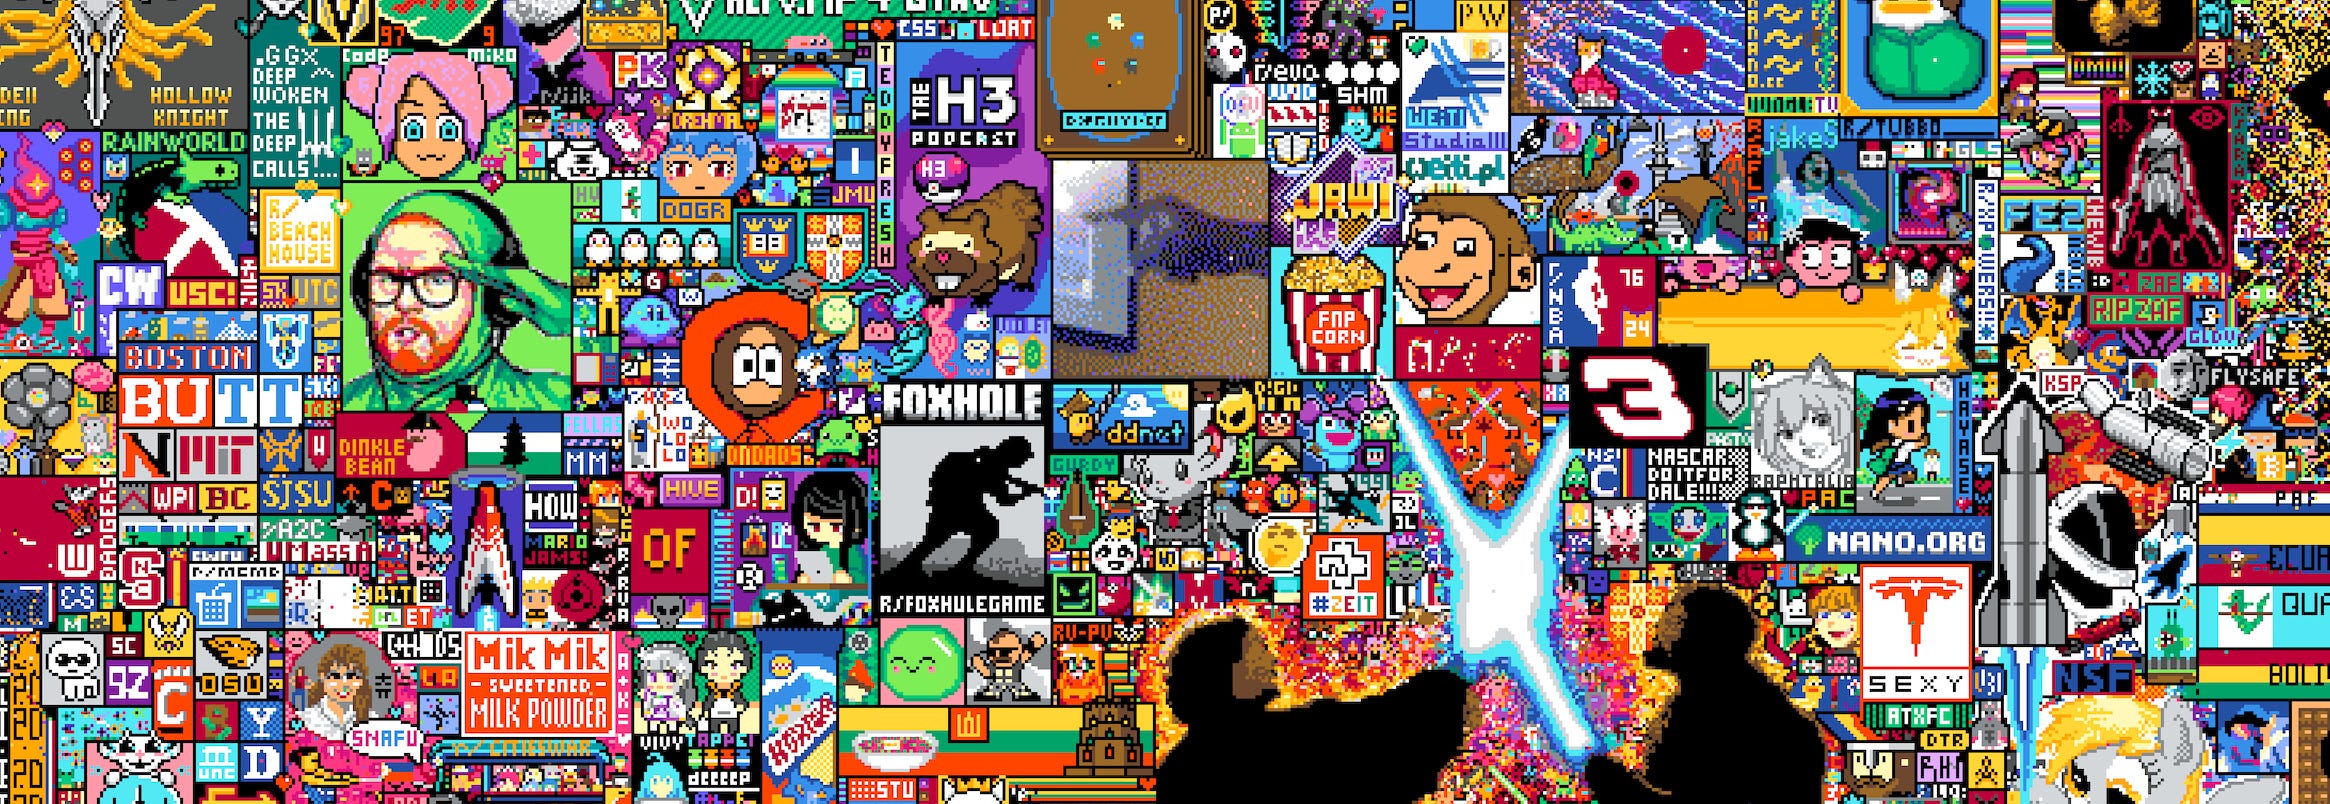 A vast mural of pixel art containing many different things, including a rocket, Kenny from South Park, and some jedis having a lightsaber fight. It’s garish, but also surprisingly dense and interesting.